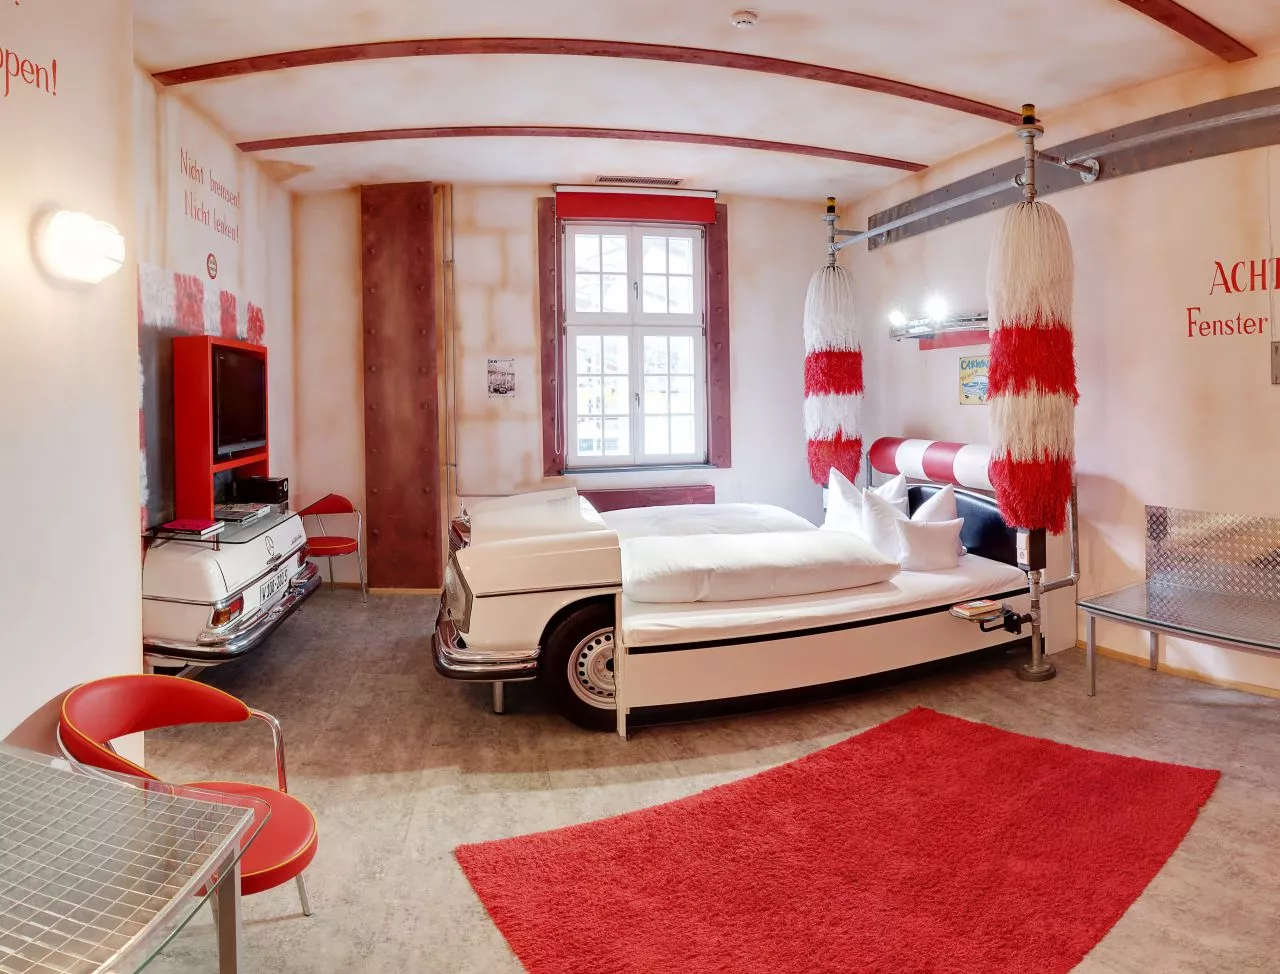 V8 Hotel in Germany, Europe | BDSM Hotels and Сlubs - Rated 4